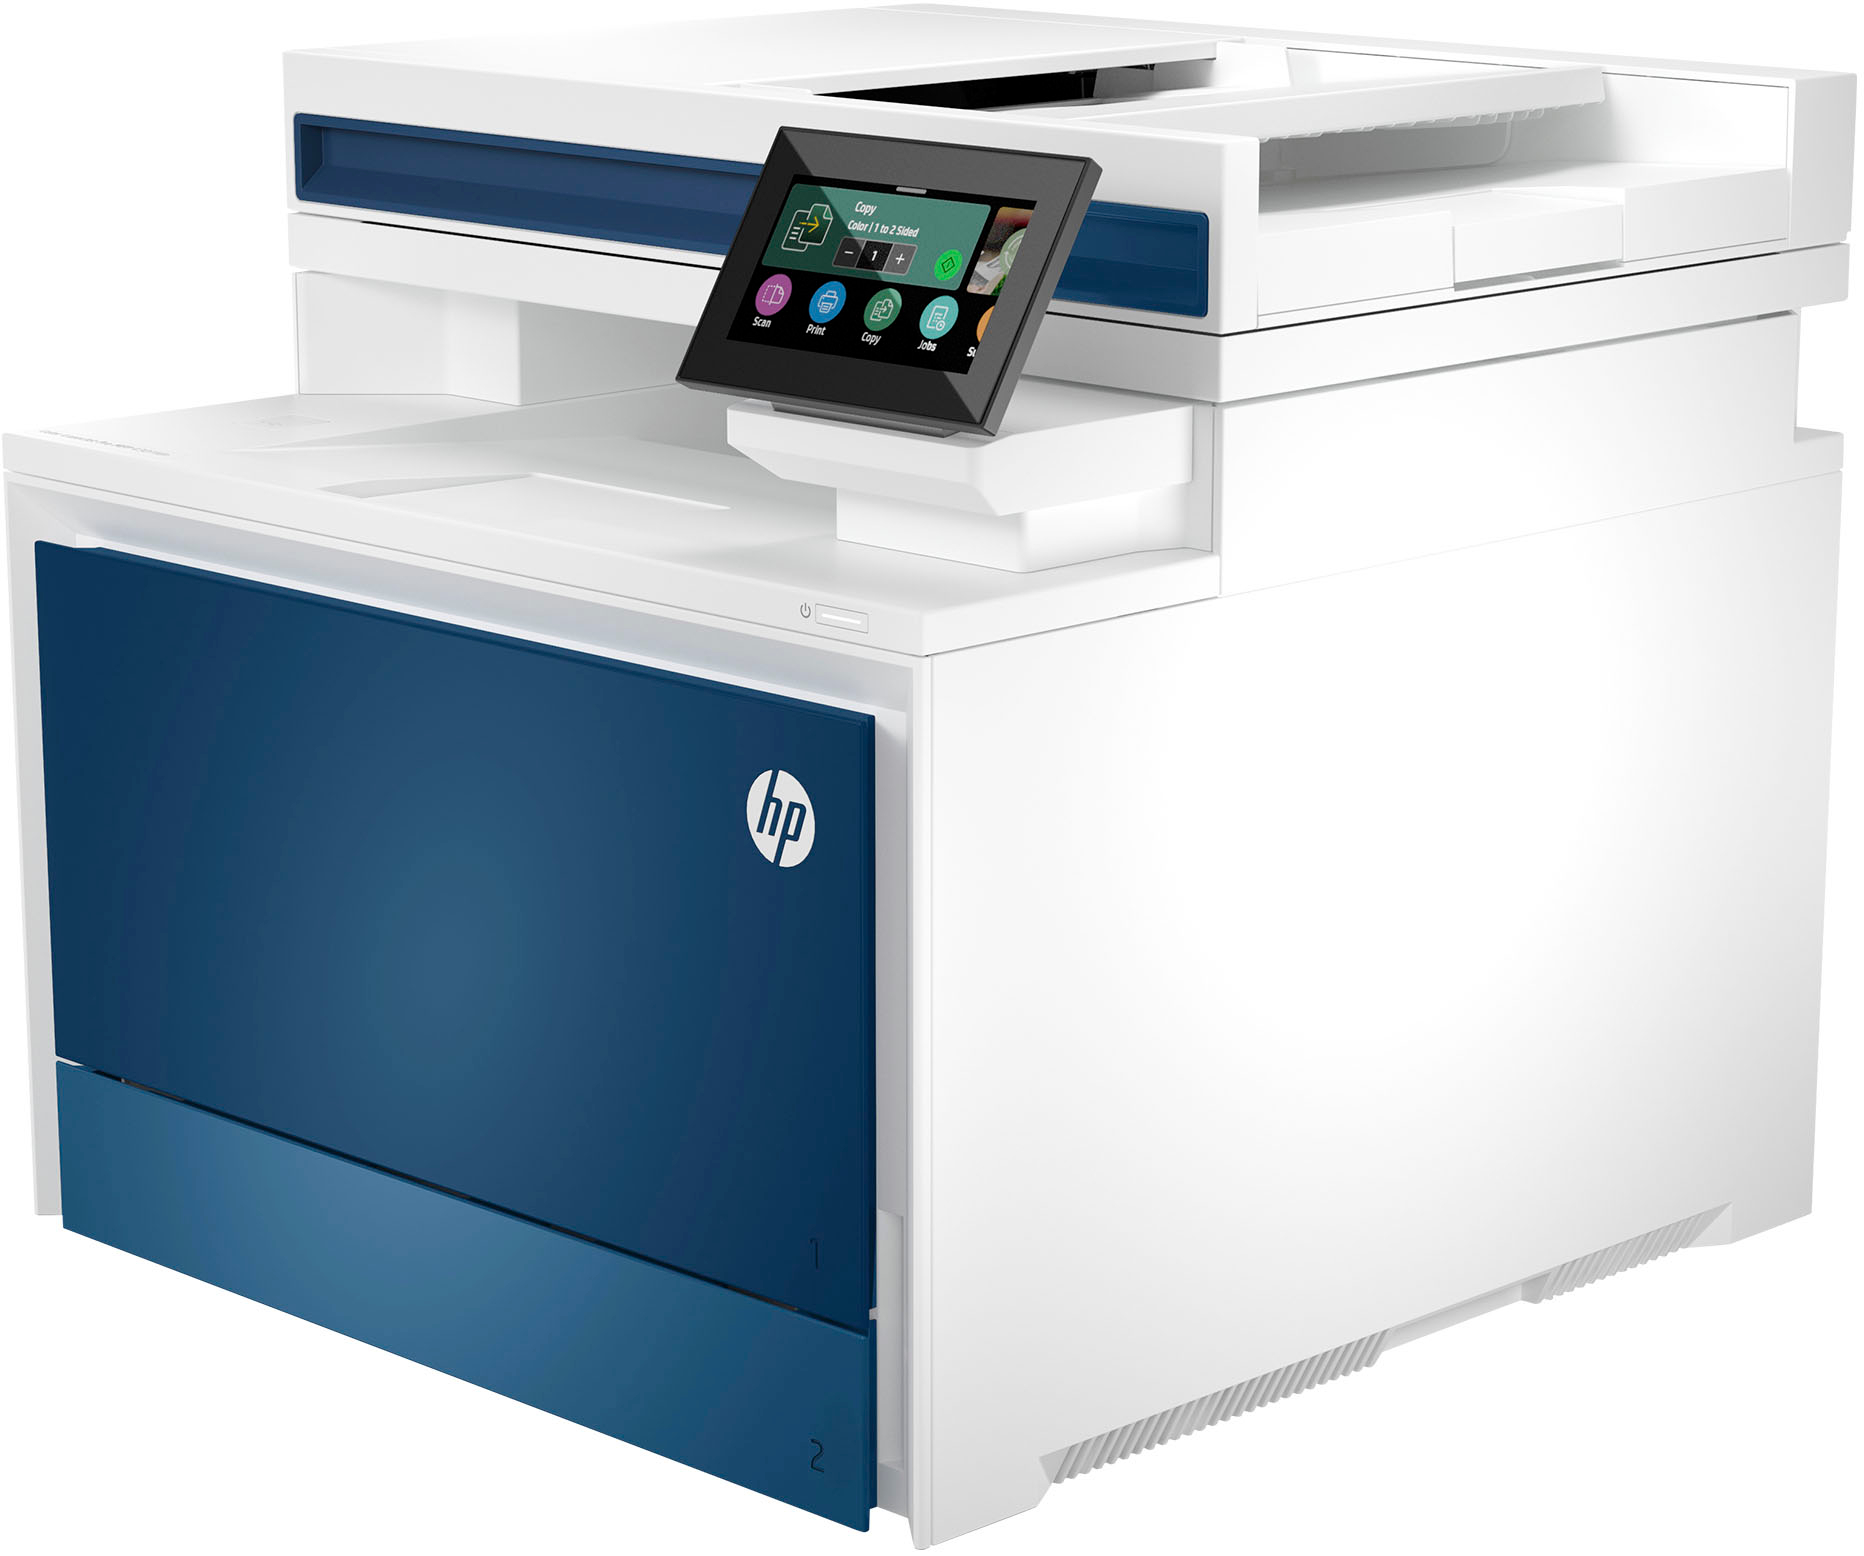 Angle View: HP - LaserJet Pro 4301fdn Color All-in-One Laser Printer - White/Blue